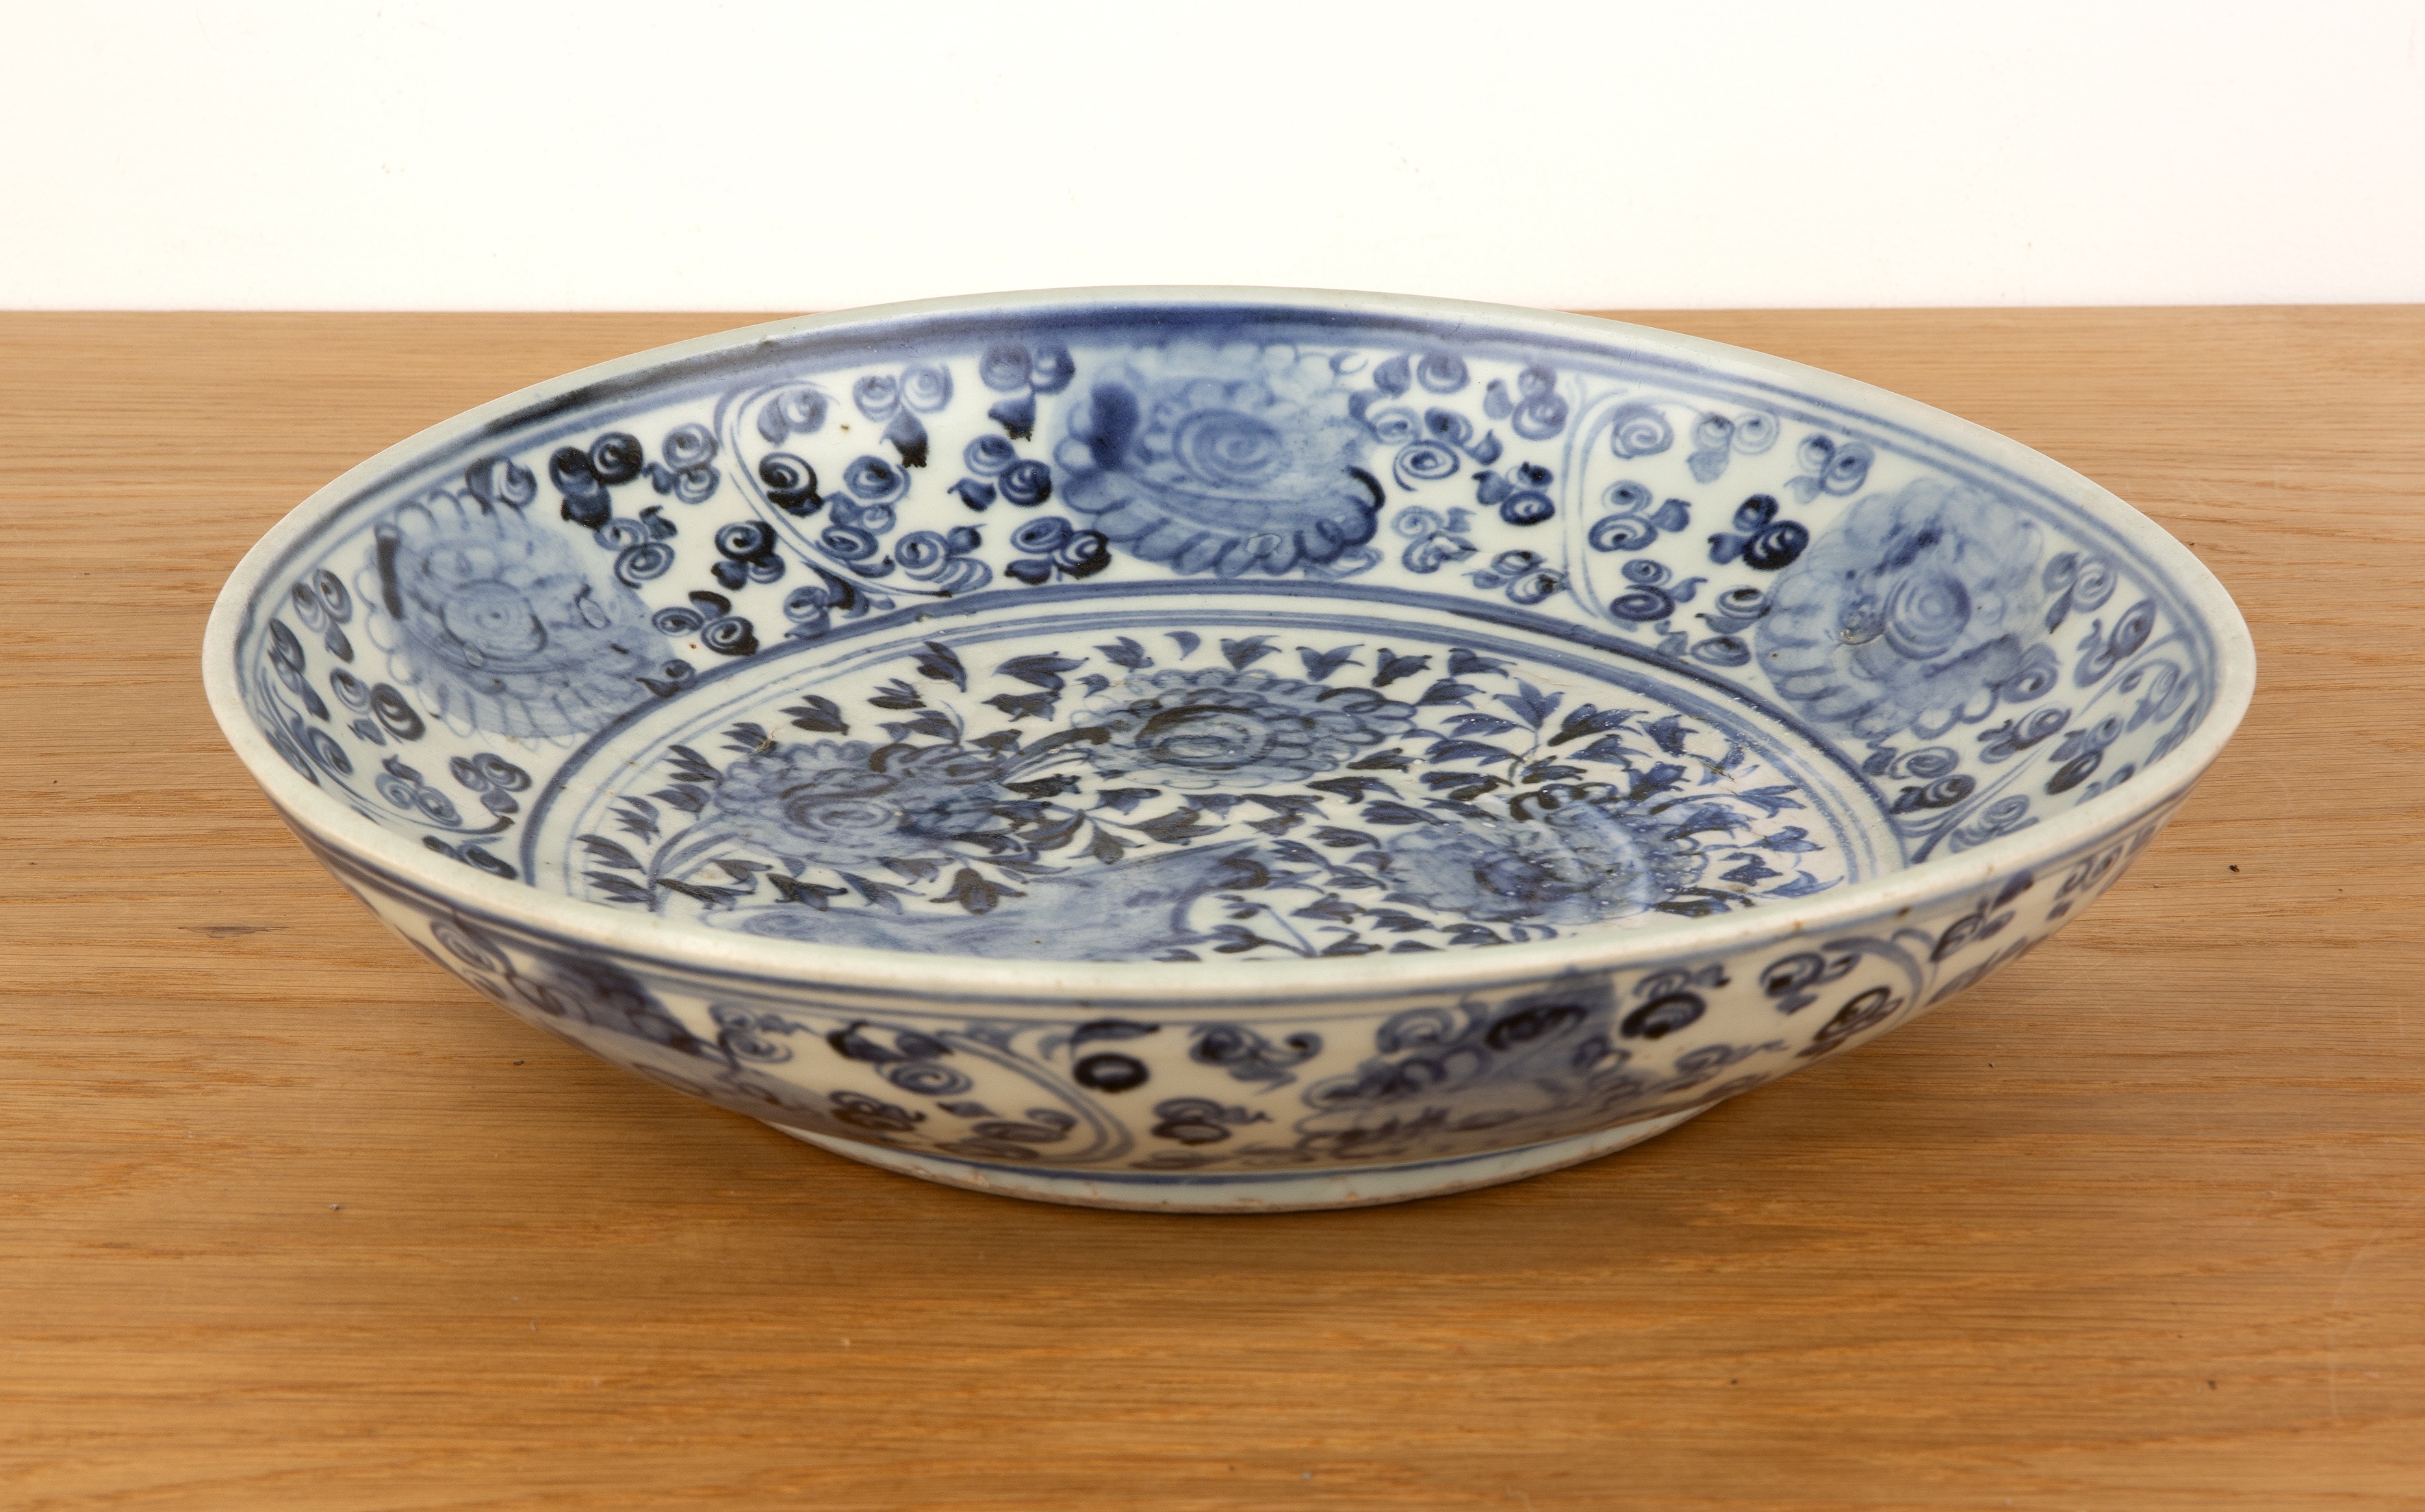 Blue and white porcelain dish Chinese, Ming Wanli period painted with rockwork and flowers, 30.7cm - Image 2 of 5